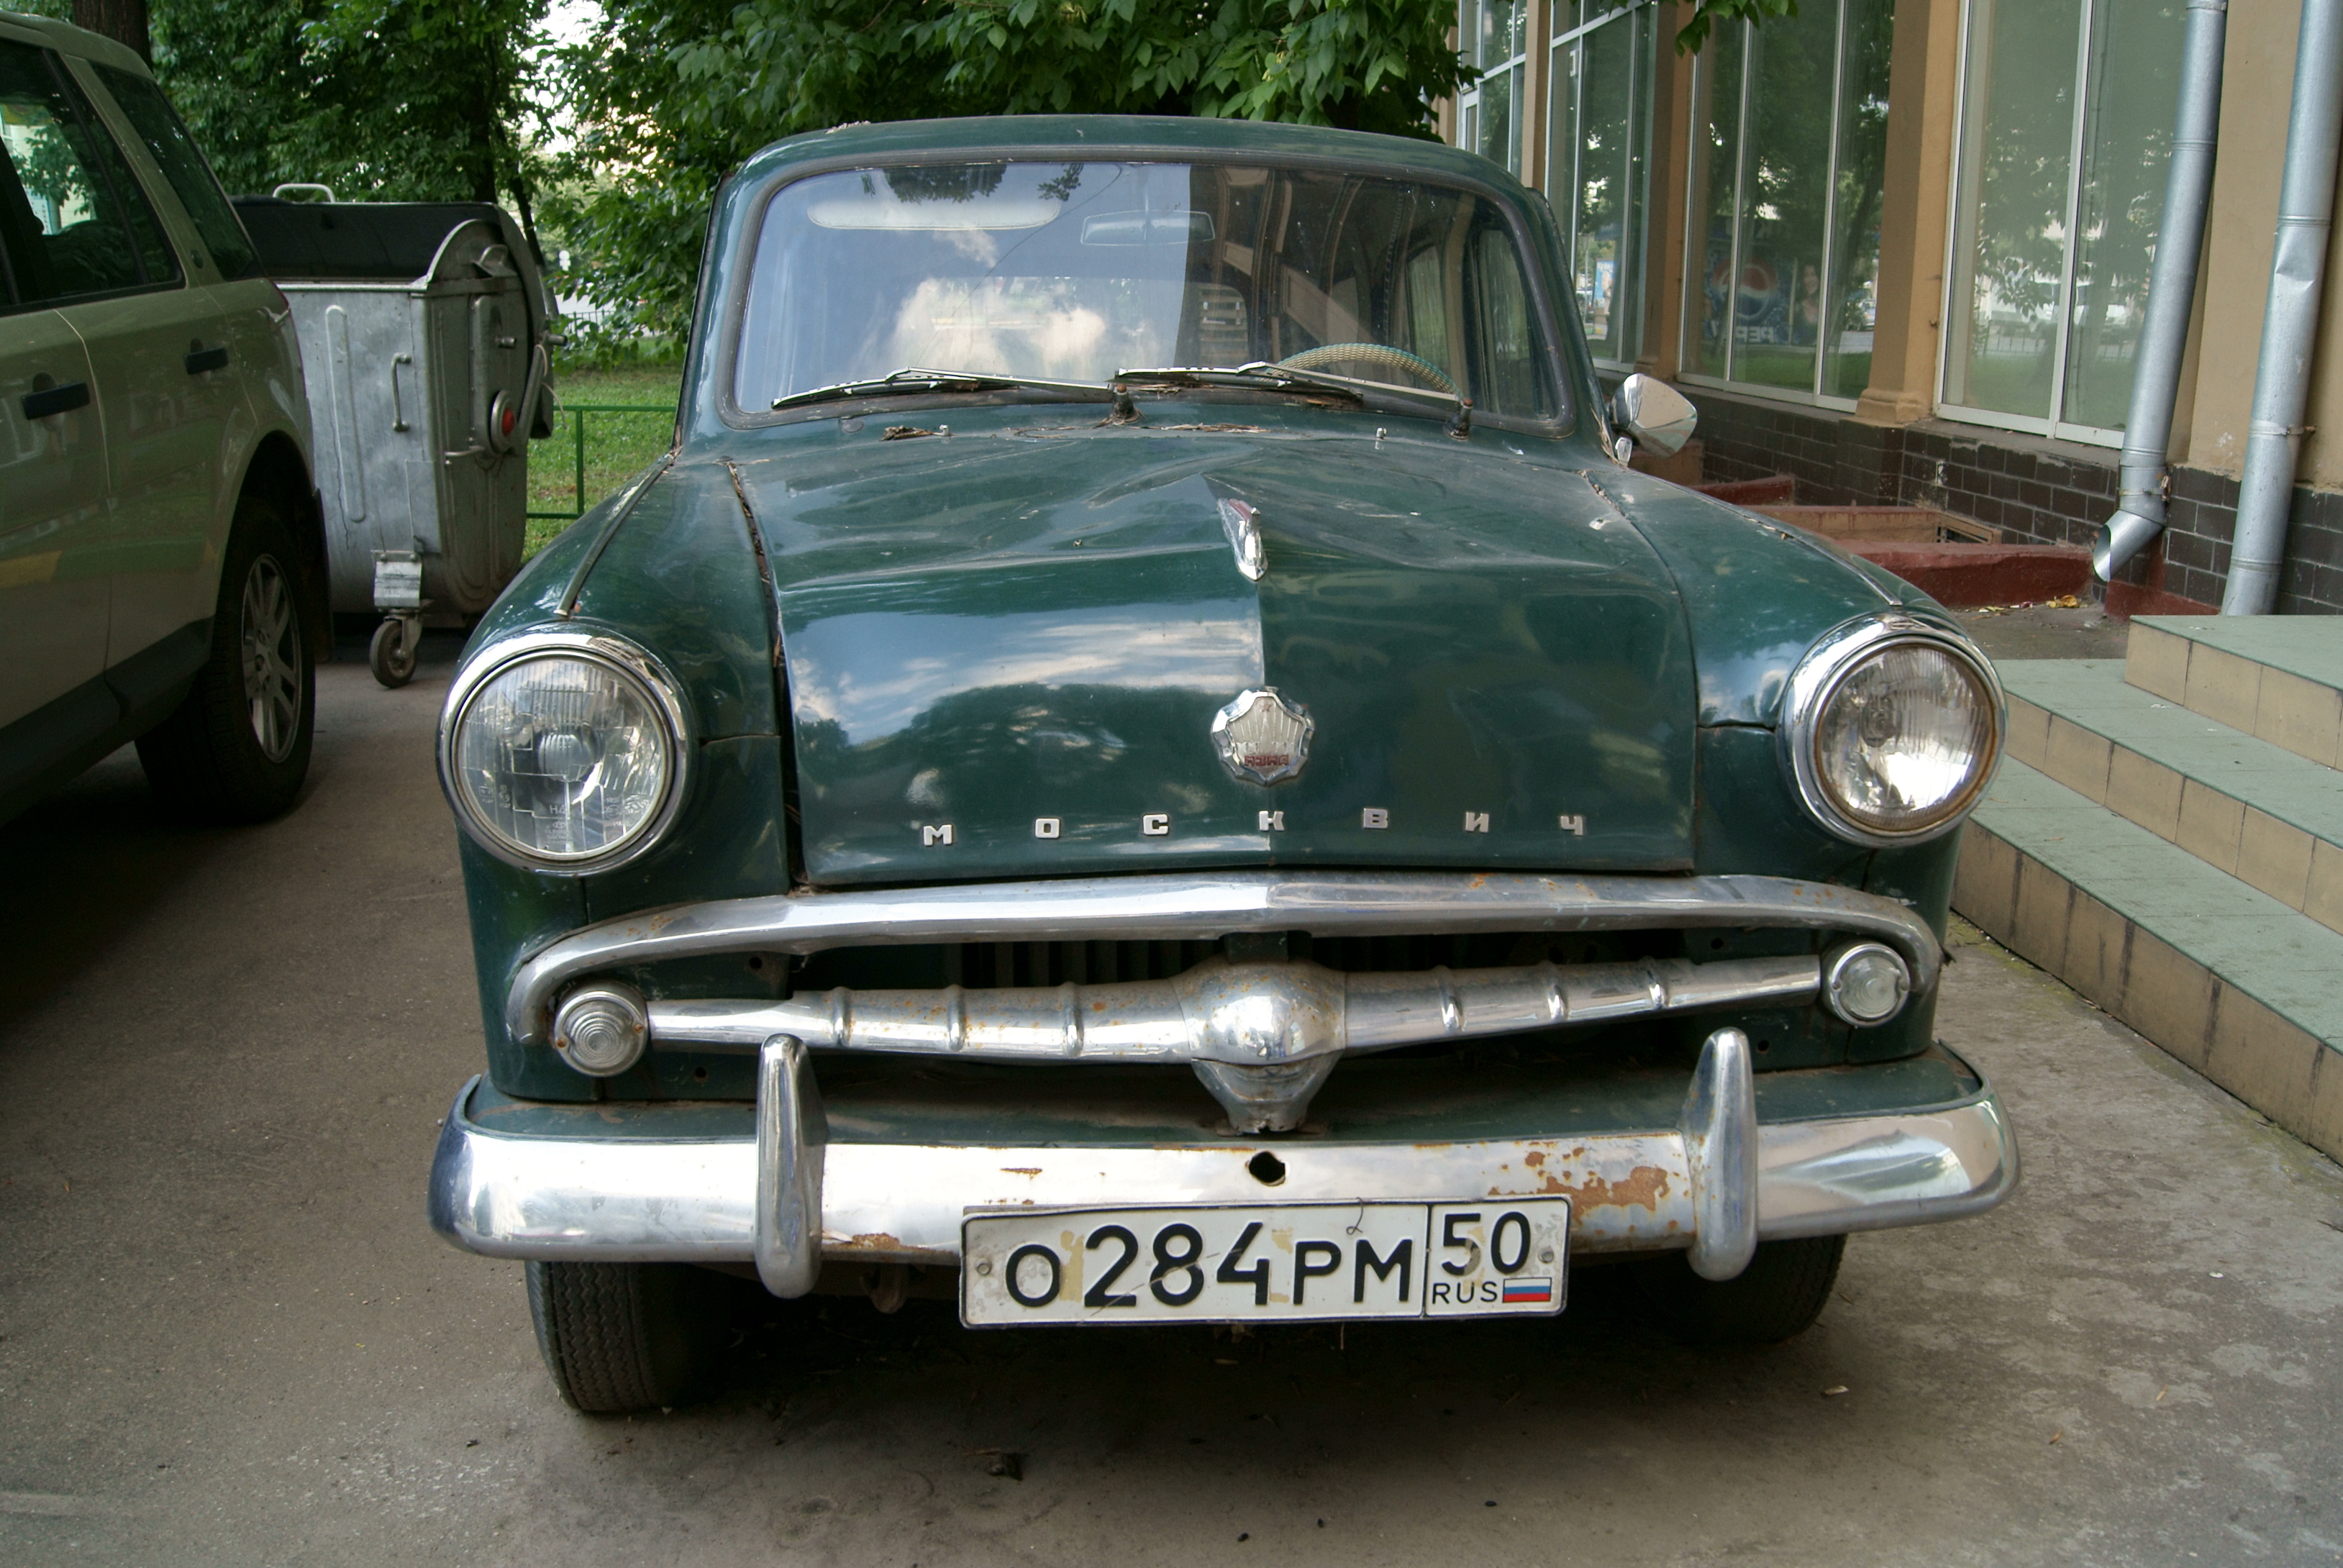 File:Moskvitch-423-grille.jpg - Wikimedia Commons